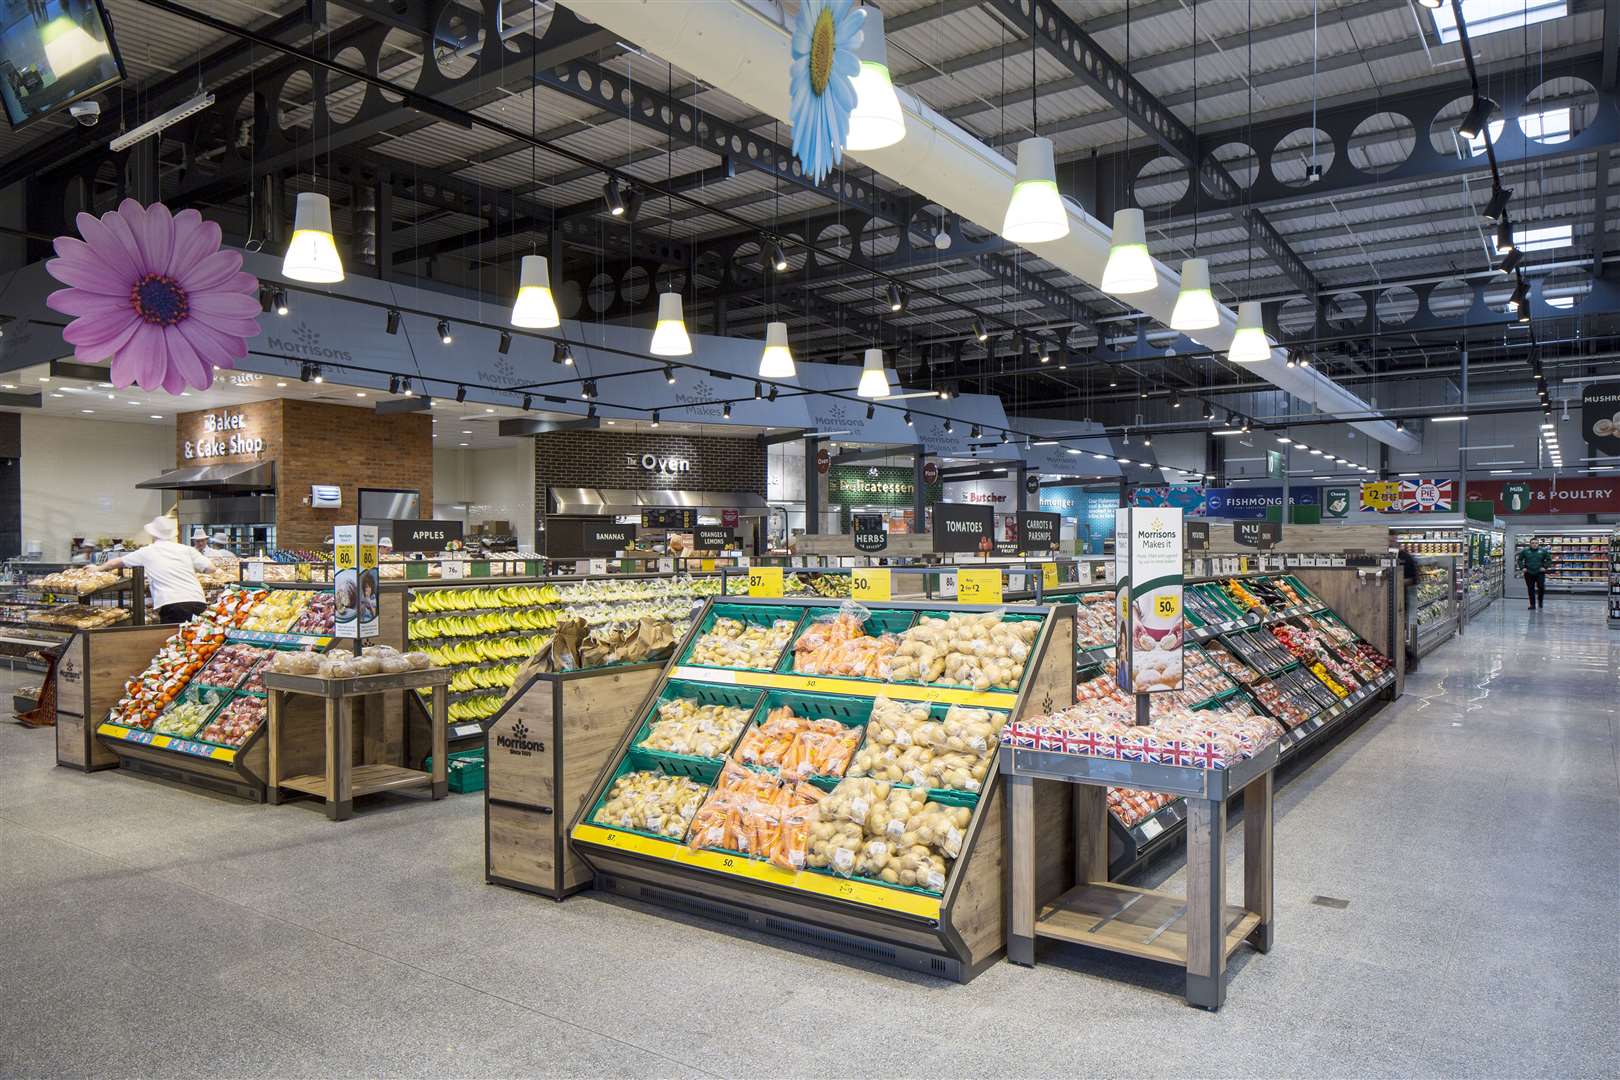 A wider range of groceries is expected to be on offer in the new store once it is complete